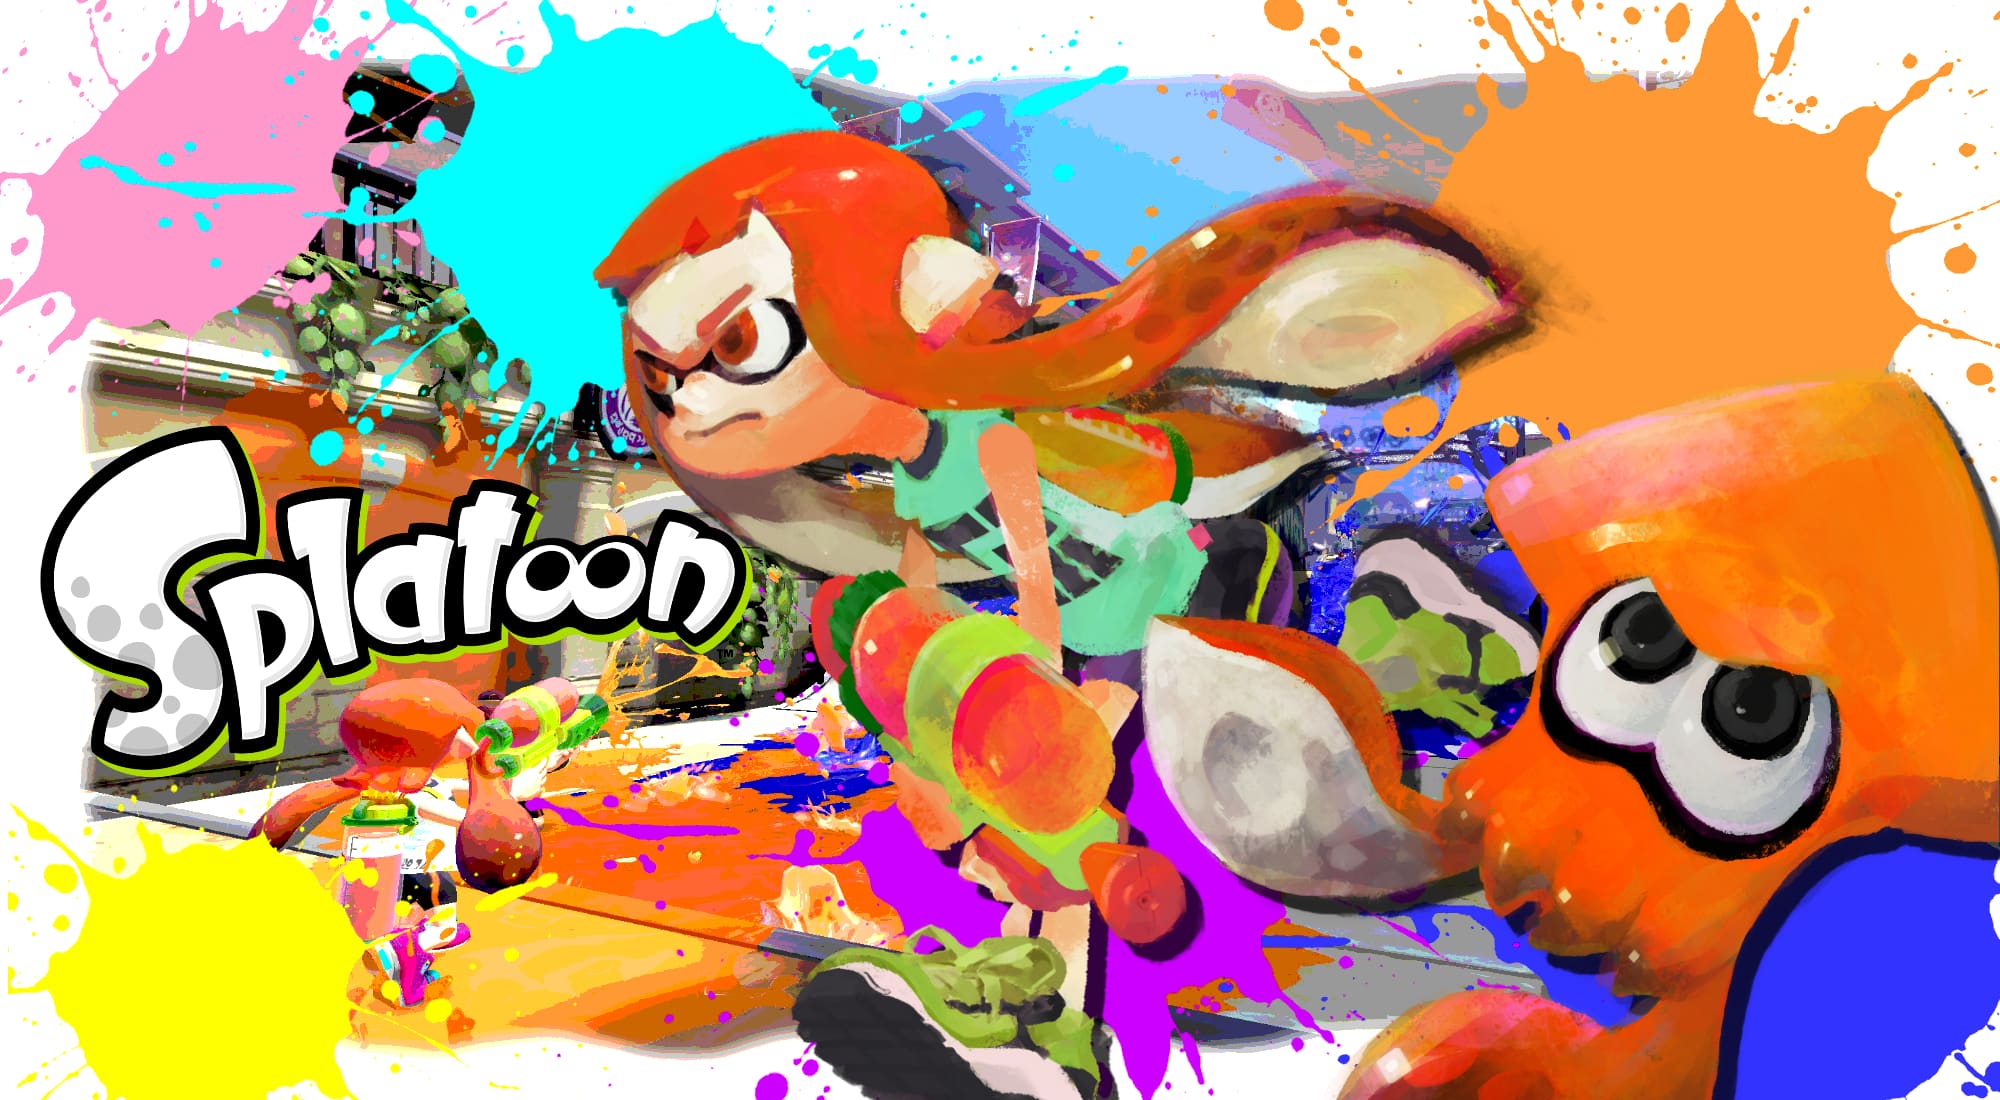 Splatoon Demo Out Now New Features Announced For The Wii U Fps Video Games Blogger